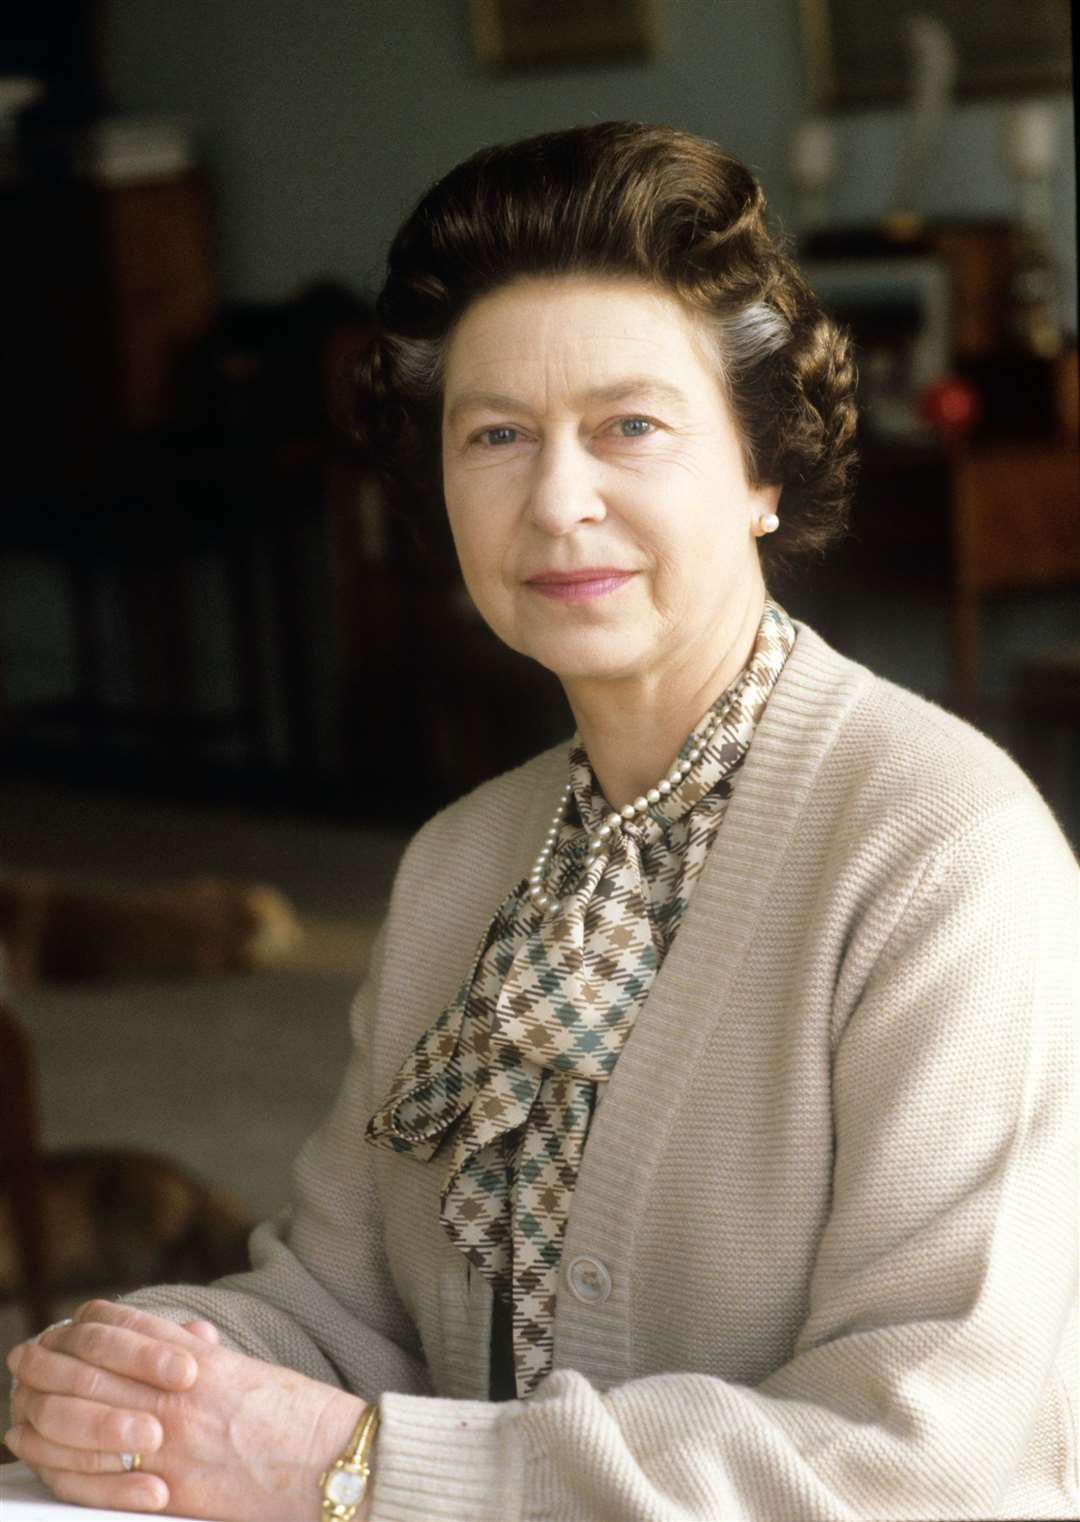 The monarch – with two streaks of grey hair – at her desk in the study of Sandringham House in Norfolk in February 1982 as she marked 30 years on the throne (Ron Bell/PA)